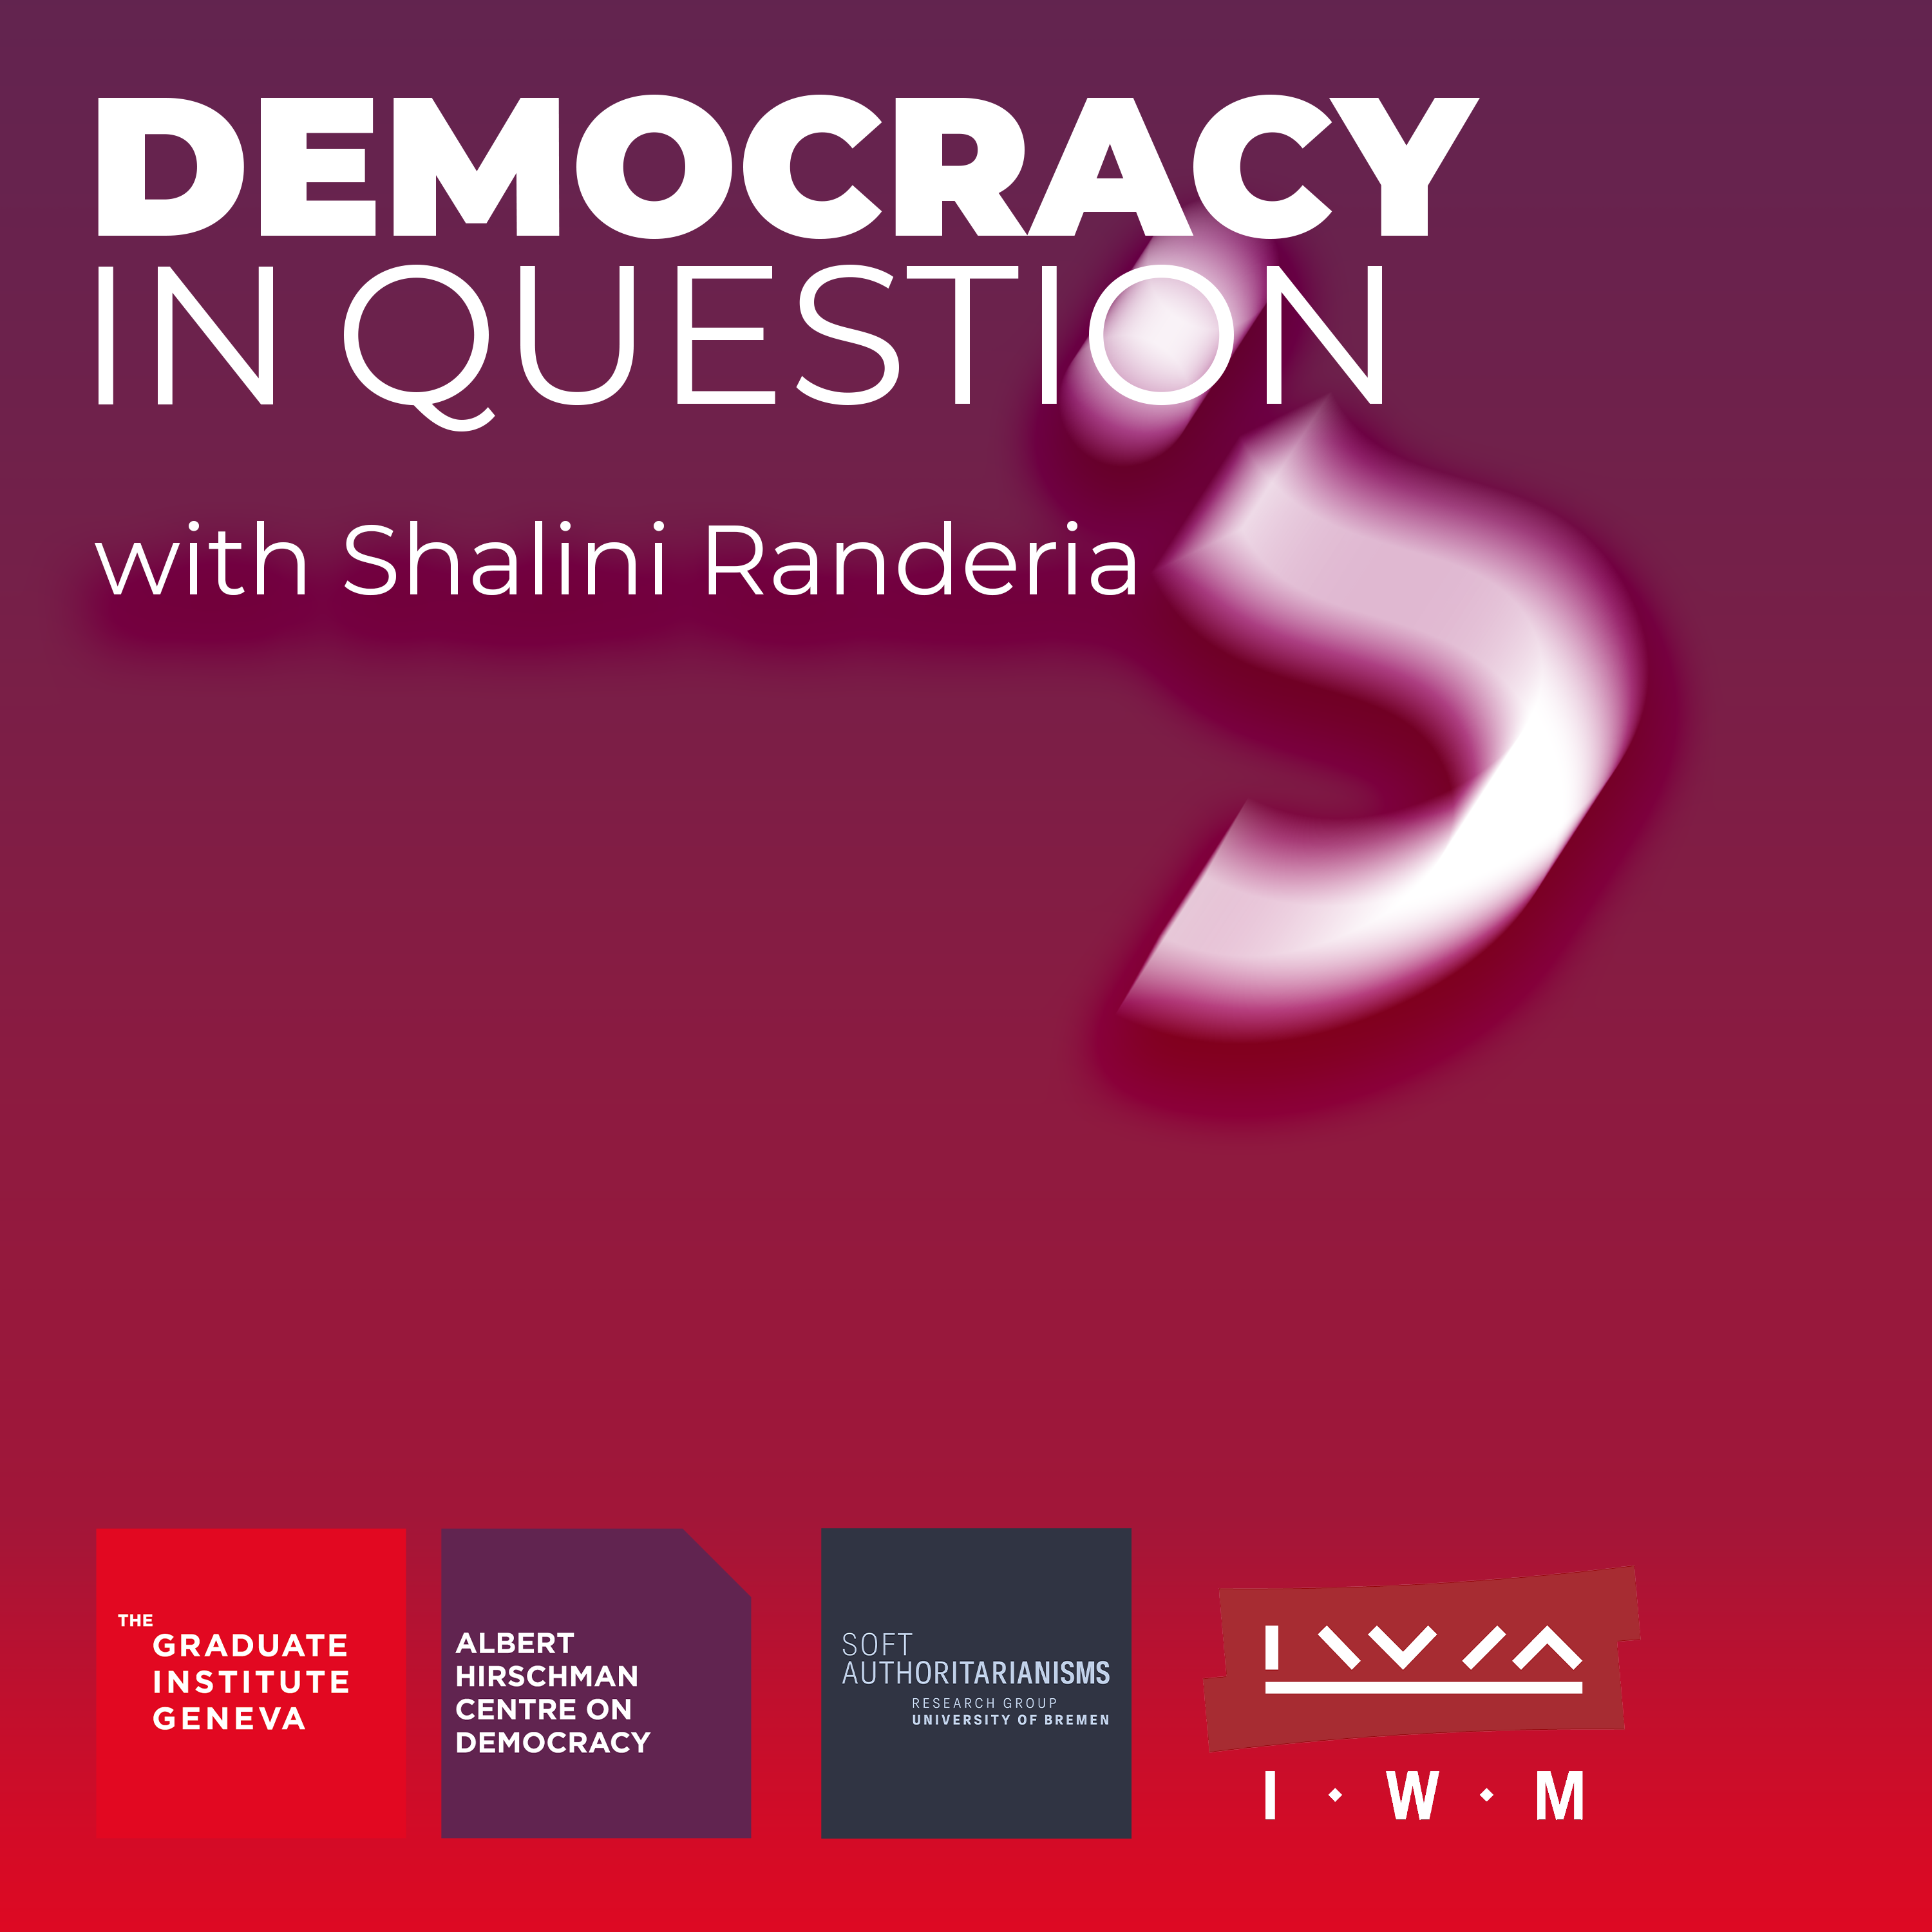 Democracy in Question? podcast logo - a purple square with the title and a large white question mark